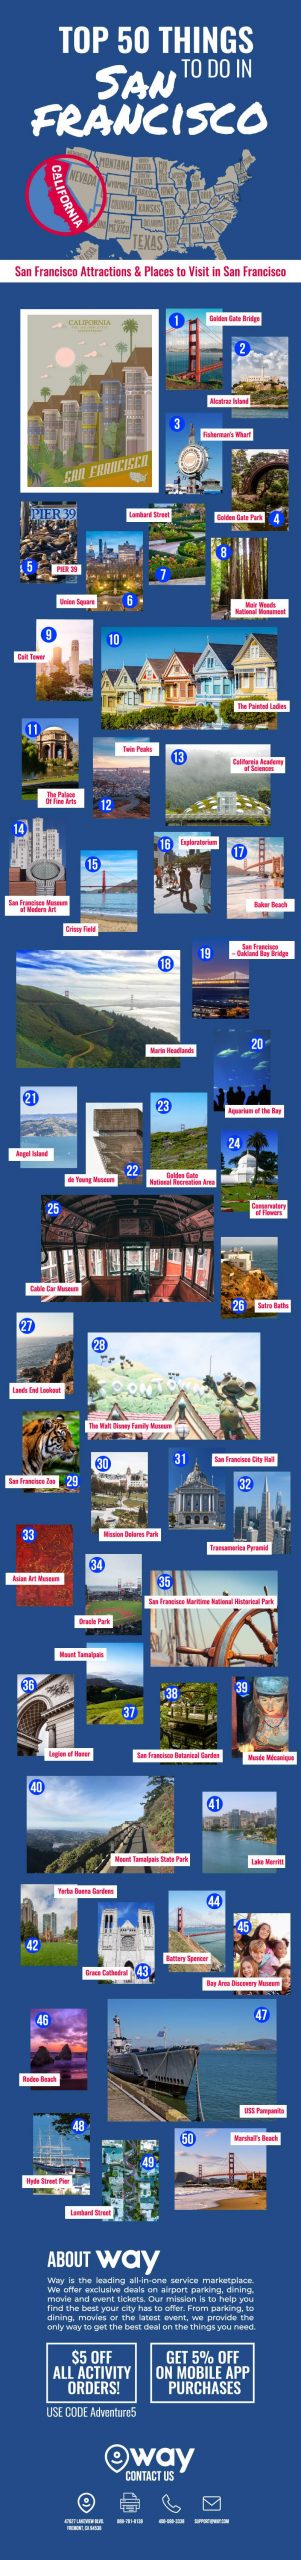 Top Fifty things to do in San Francisco - Infographic Portal